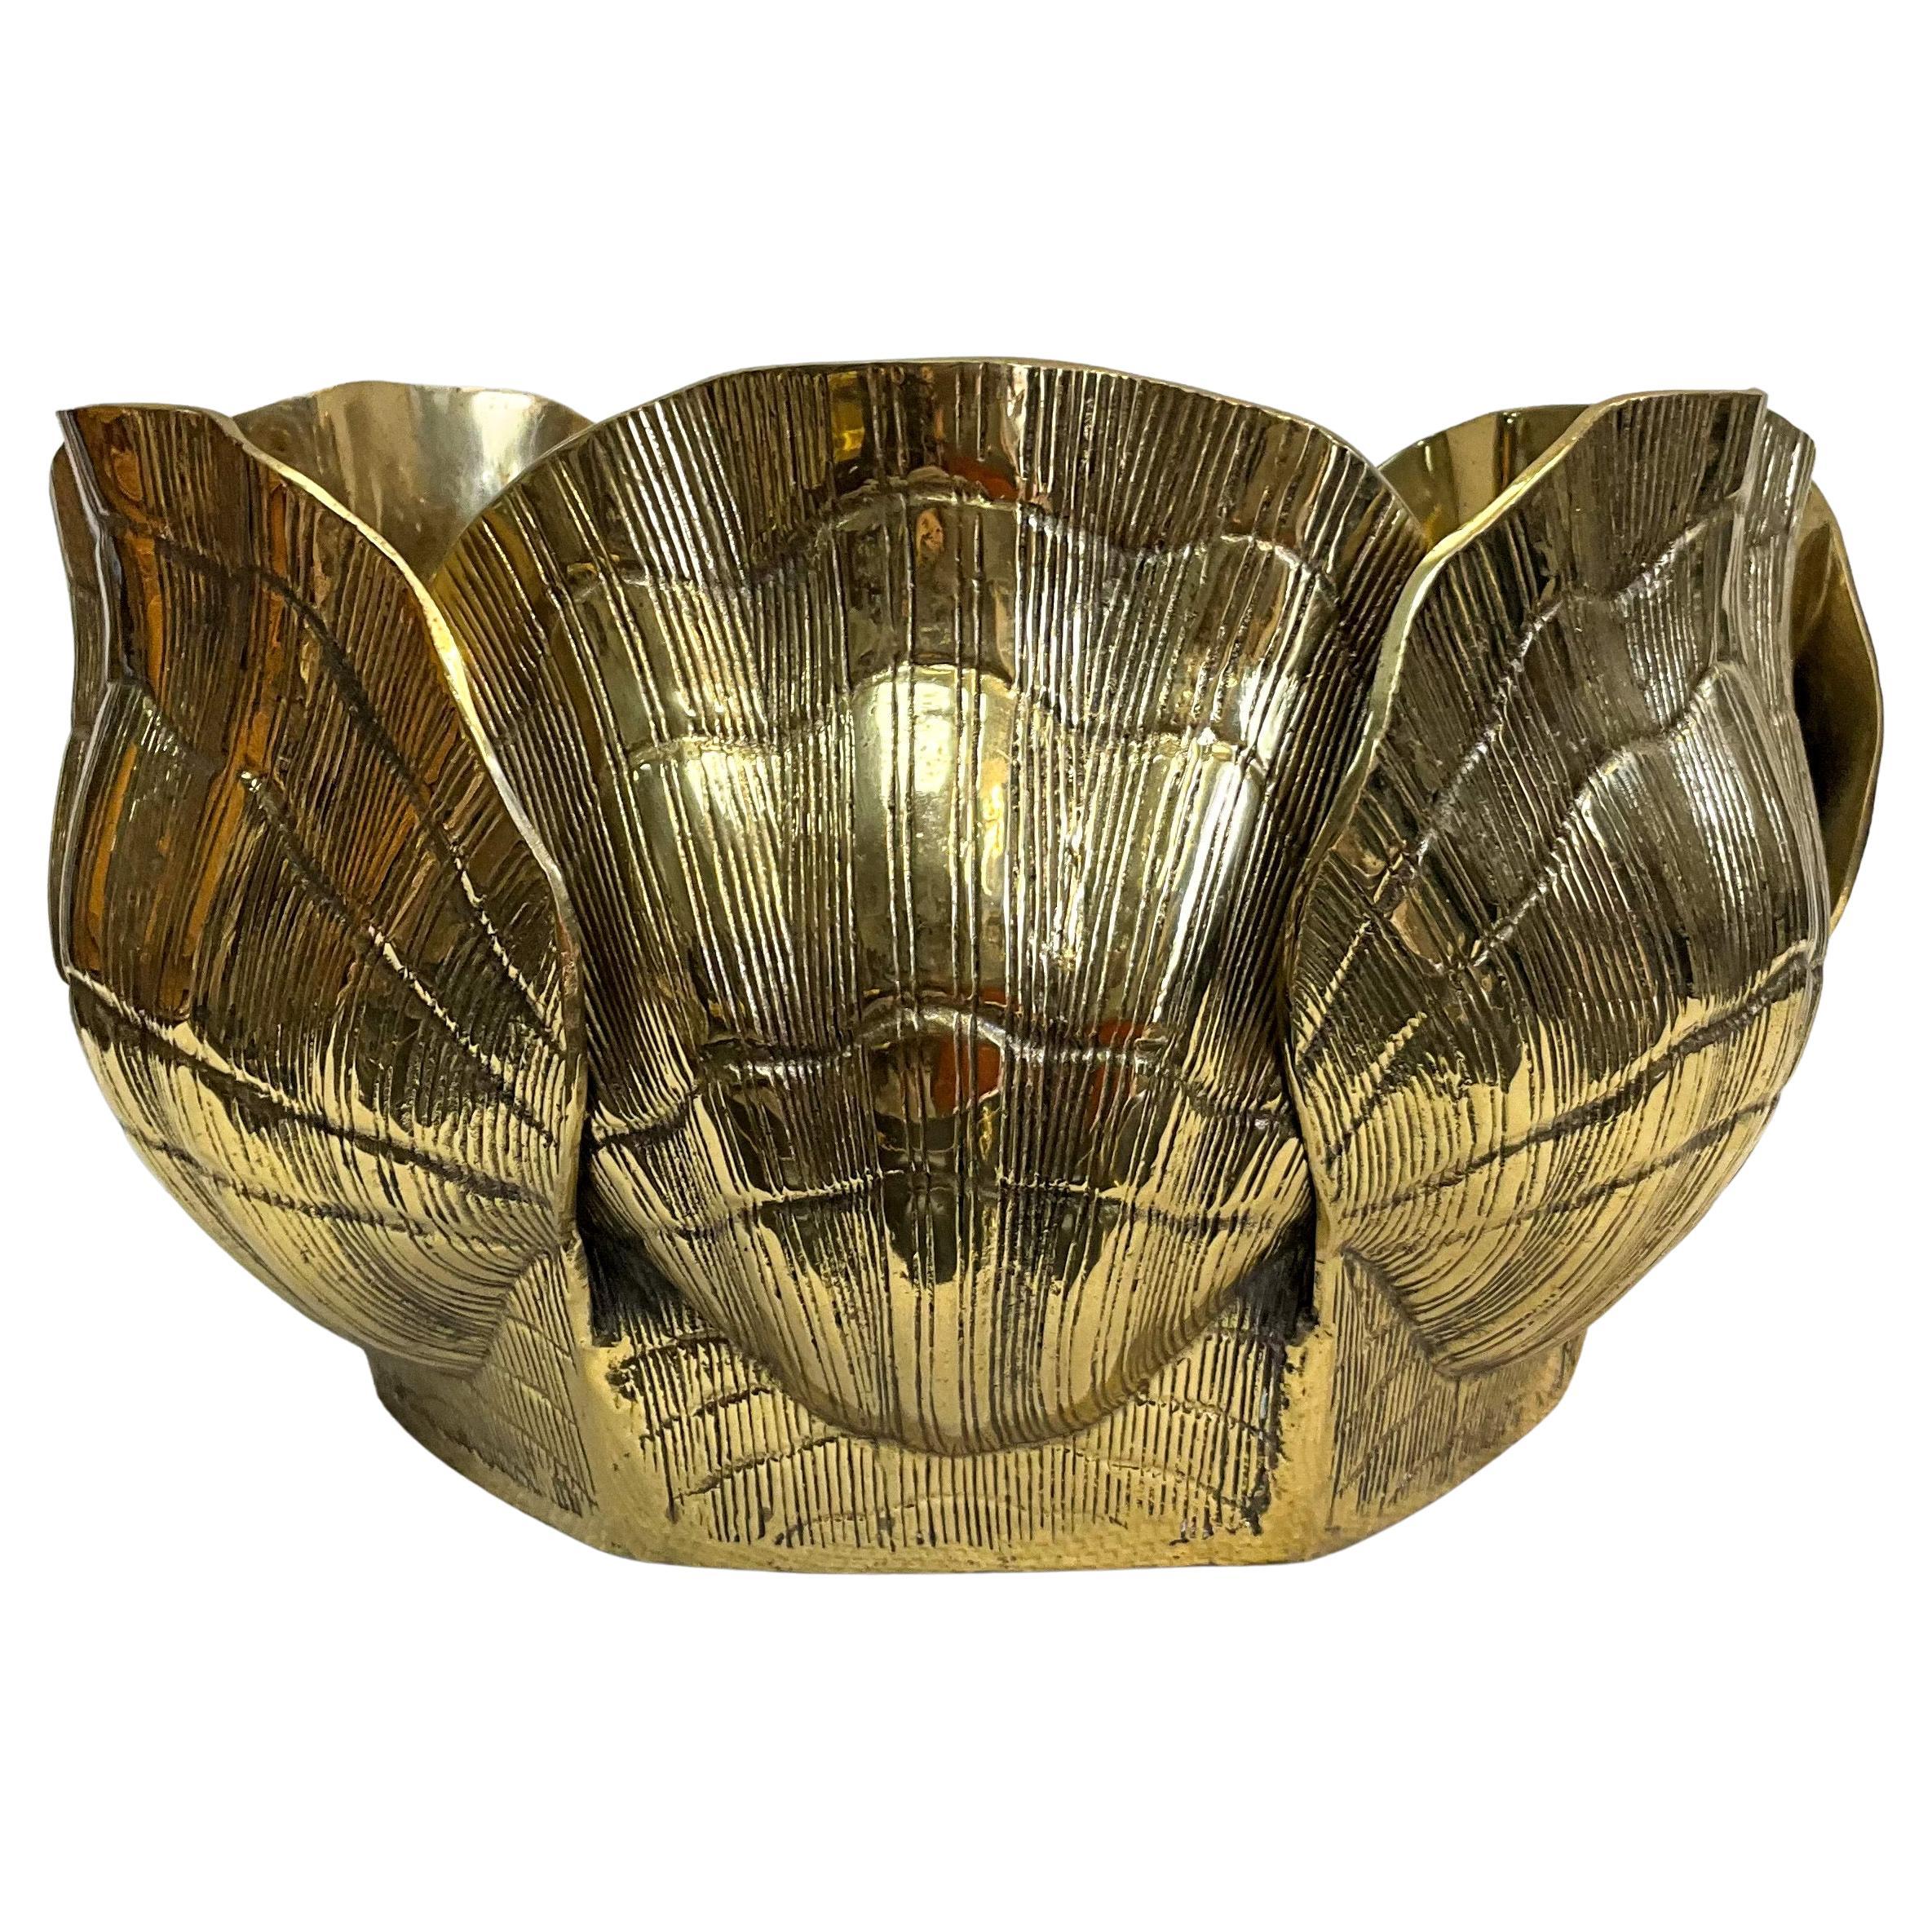 Brass brightens every room! This is a large scale Hollywood Regency style shell form planter attributed to Chapman. It is a heavy, sold brass casting. The interior has some oxidation that could possibly be scrubbed clean.